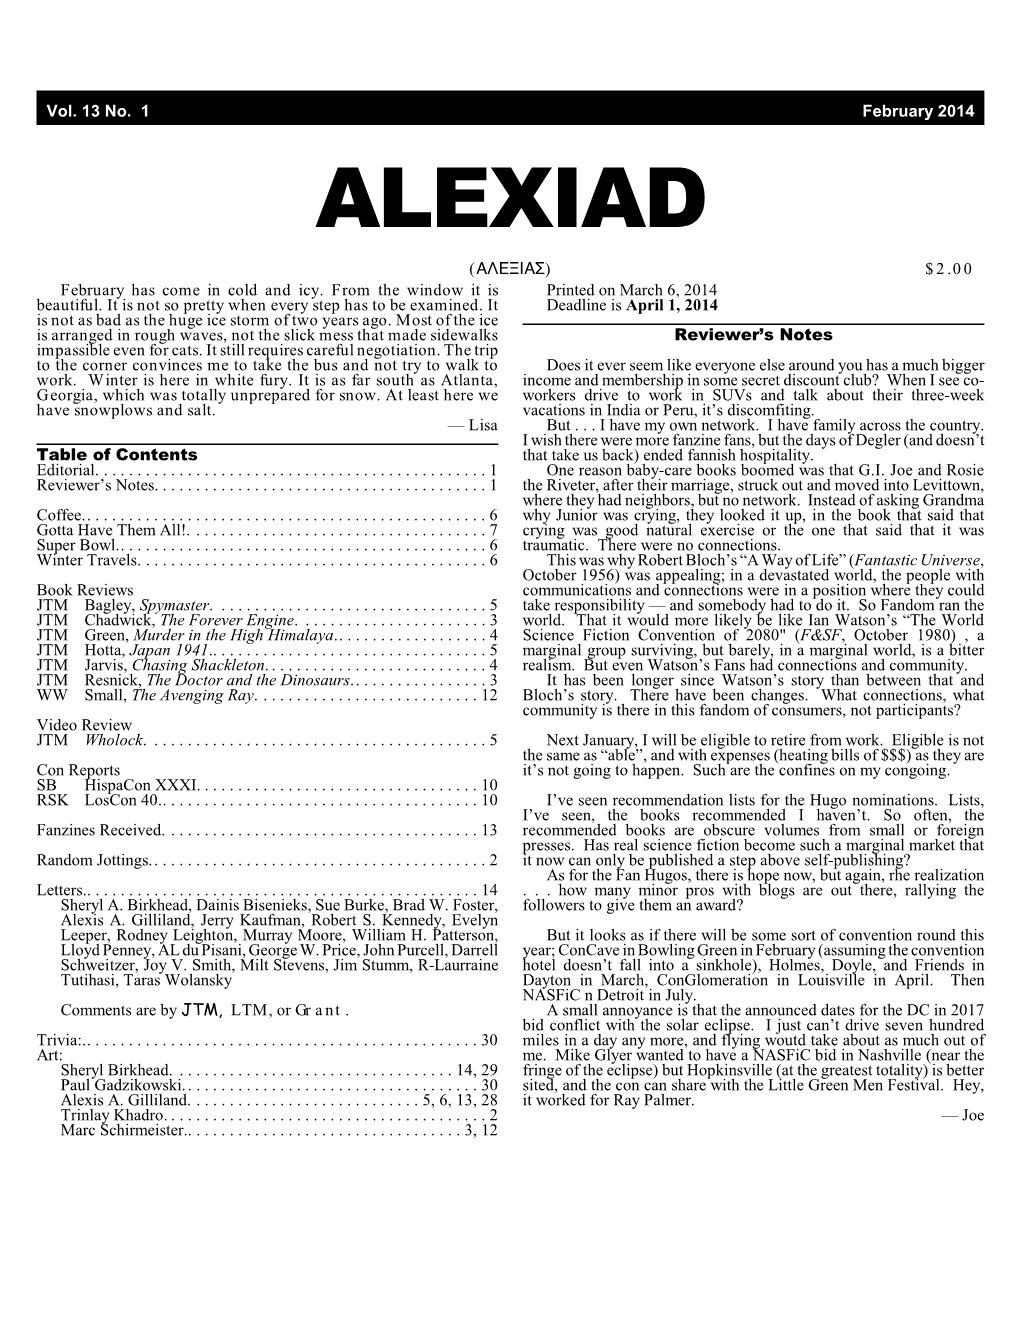 ALEXIAD (!7+=3!G) $2.00 February Has Come in Cold and Icy